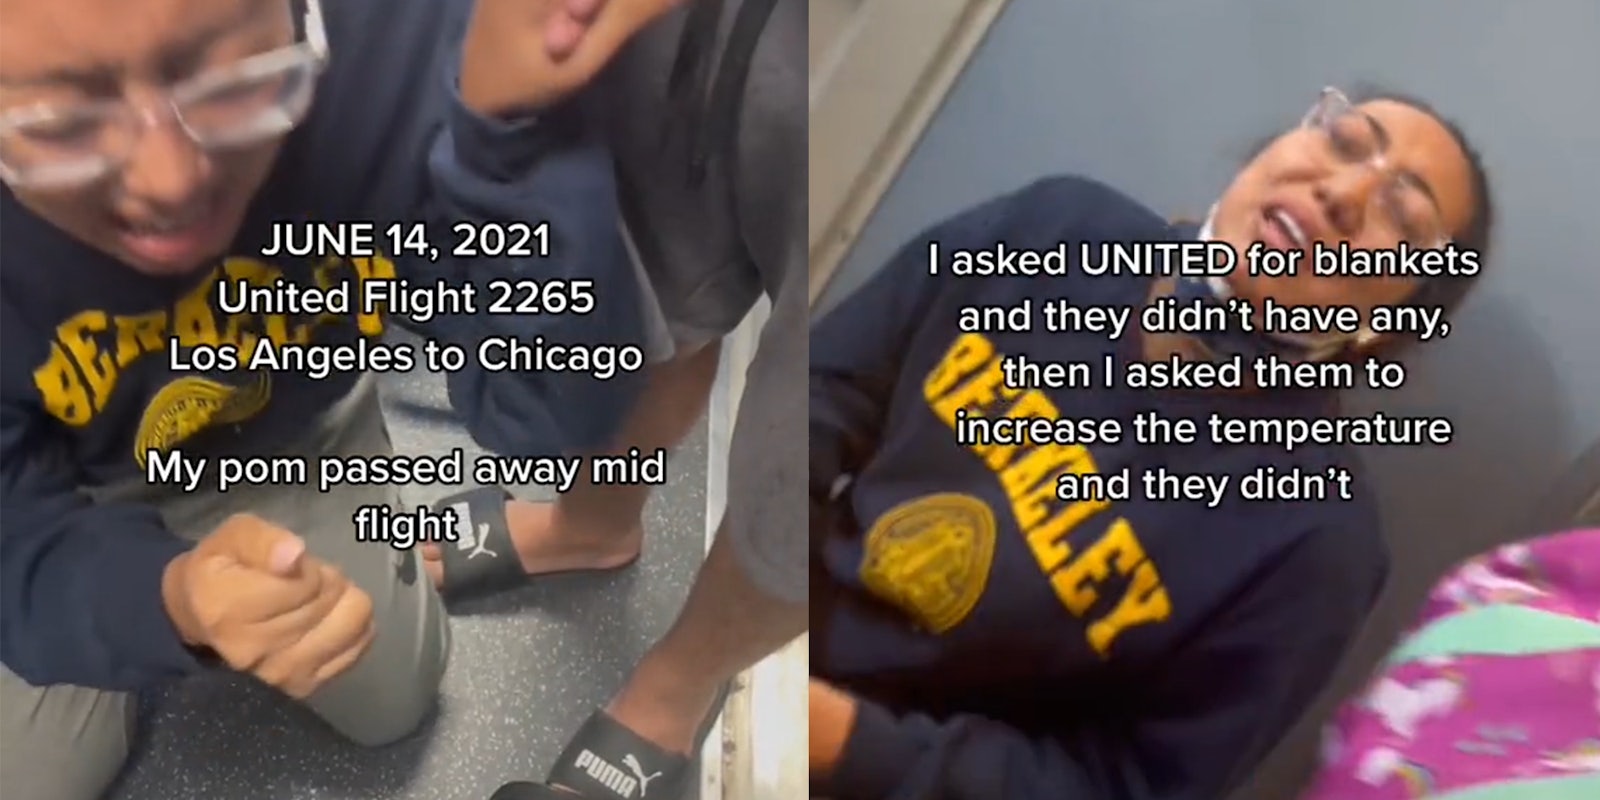 woman sobbing on ground with caption 'June 14, 2021 United Flight 2265 Los Angeles to Chicago, My pom passed away mid flight (l) woman crying with caption 'I asked UNITED for blankets and they didn't have any, then I asked them to increase the temperature and they didn't'